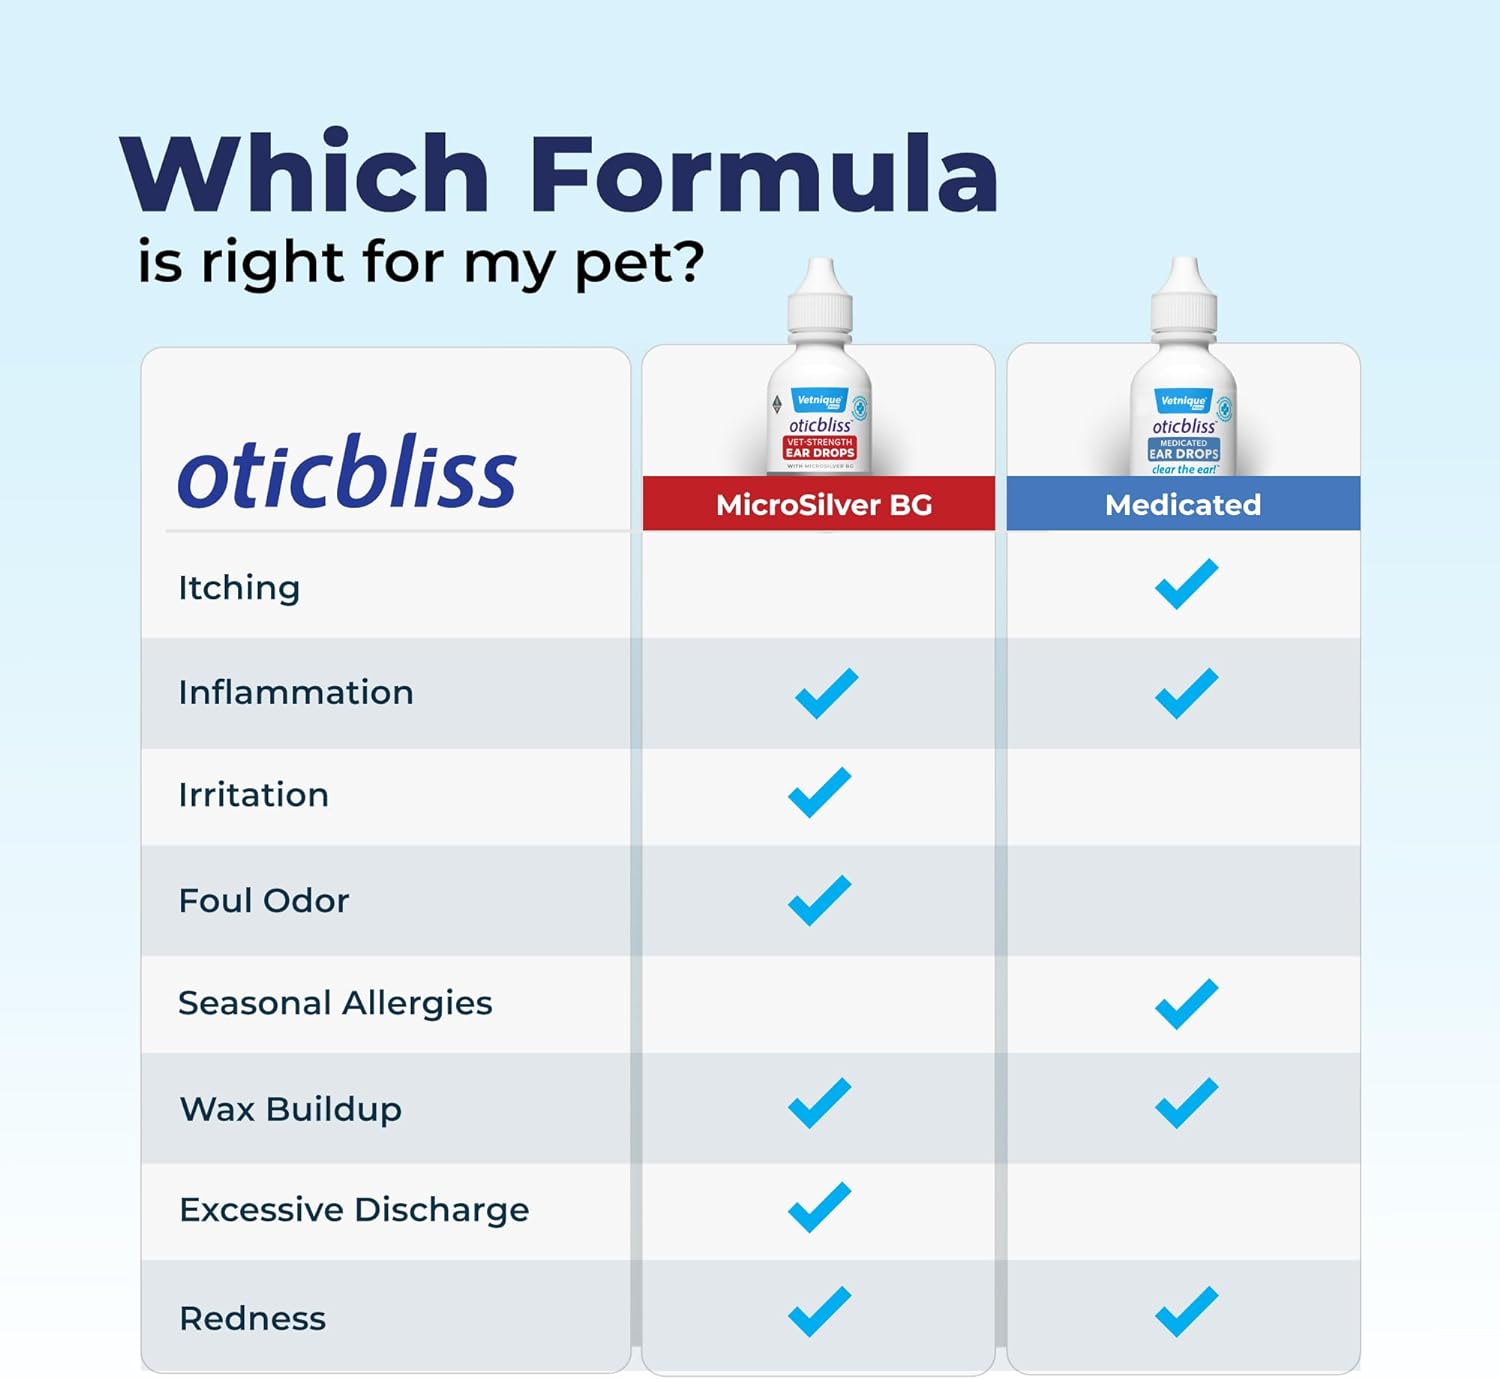 Vetnique Oticbliss Cat & Dog Ear Infection Treatment Drops - with 1% Hydrocortisone & MicroSilver BG for Dog Yeast Ear Infections - Vet Recommended Cat & Dog Ear Cleaner for Itchy Ear Relief : Pet Supplies